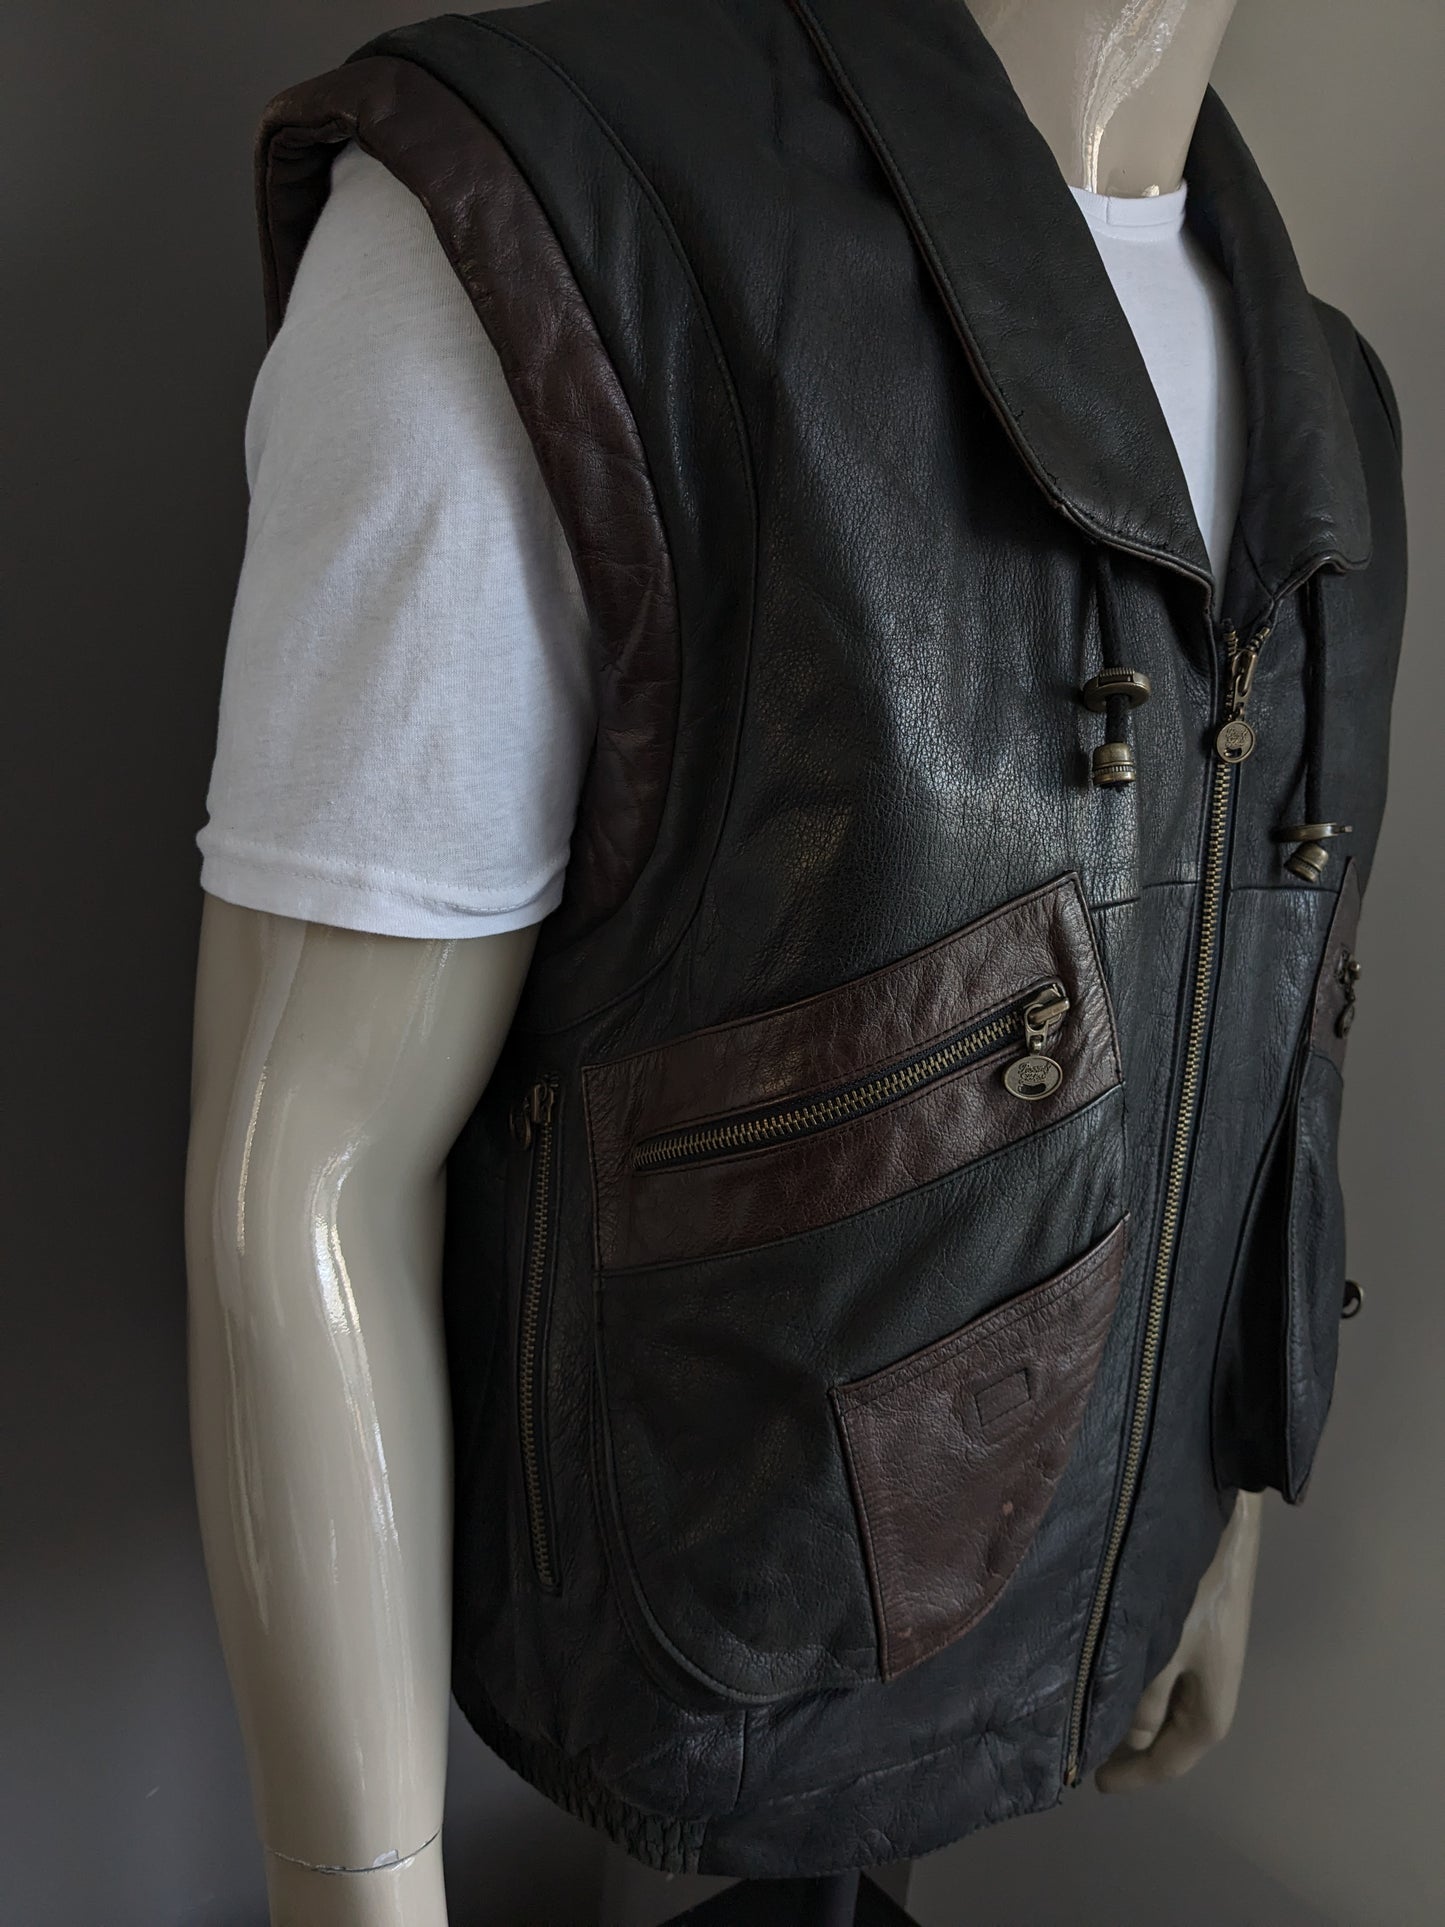 Vintage 80's - 90's Rover & Lakes Learn Body Warmer / Gilet. Lots of bags, 2 inner pockets and light lined. Brown / black. Size XL.